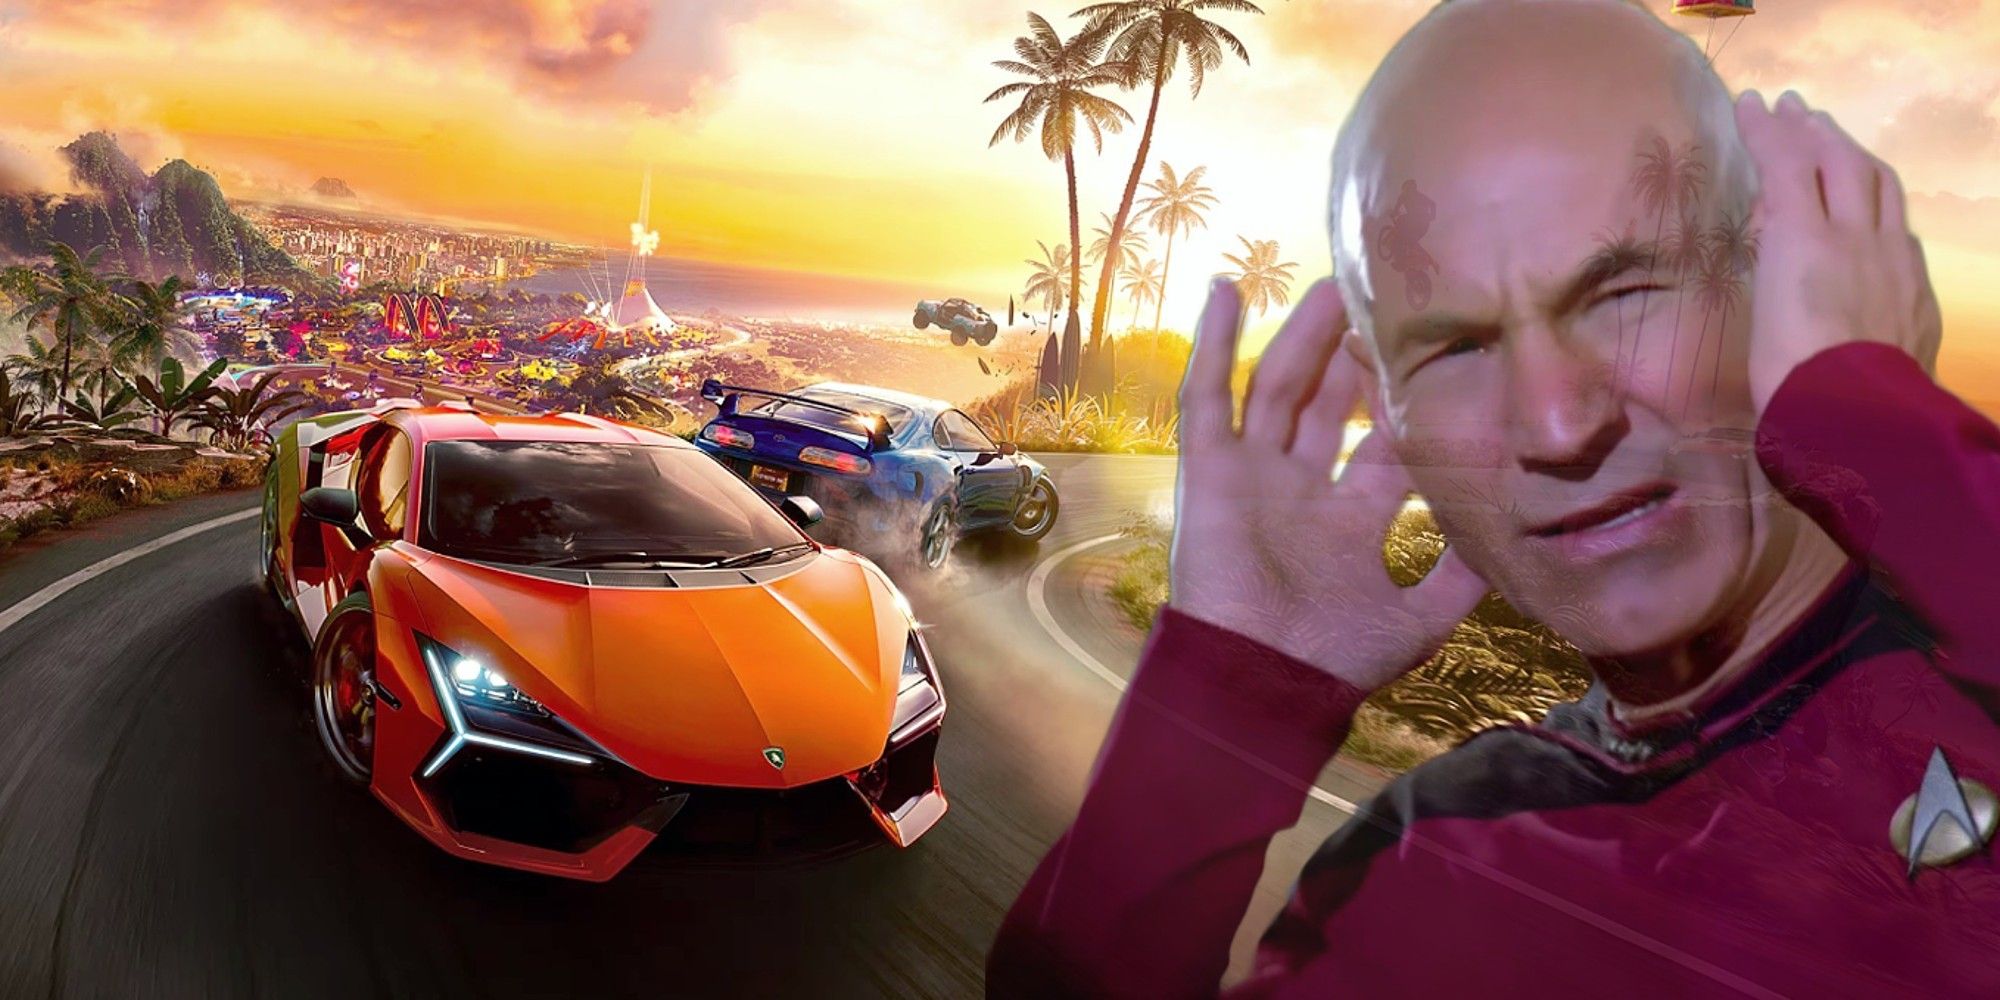 The Crew Motorfest Key Artwork With An Orange Lambo And Star Trek's Picard Covering His Ears